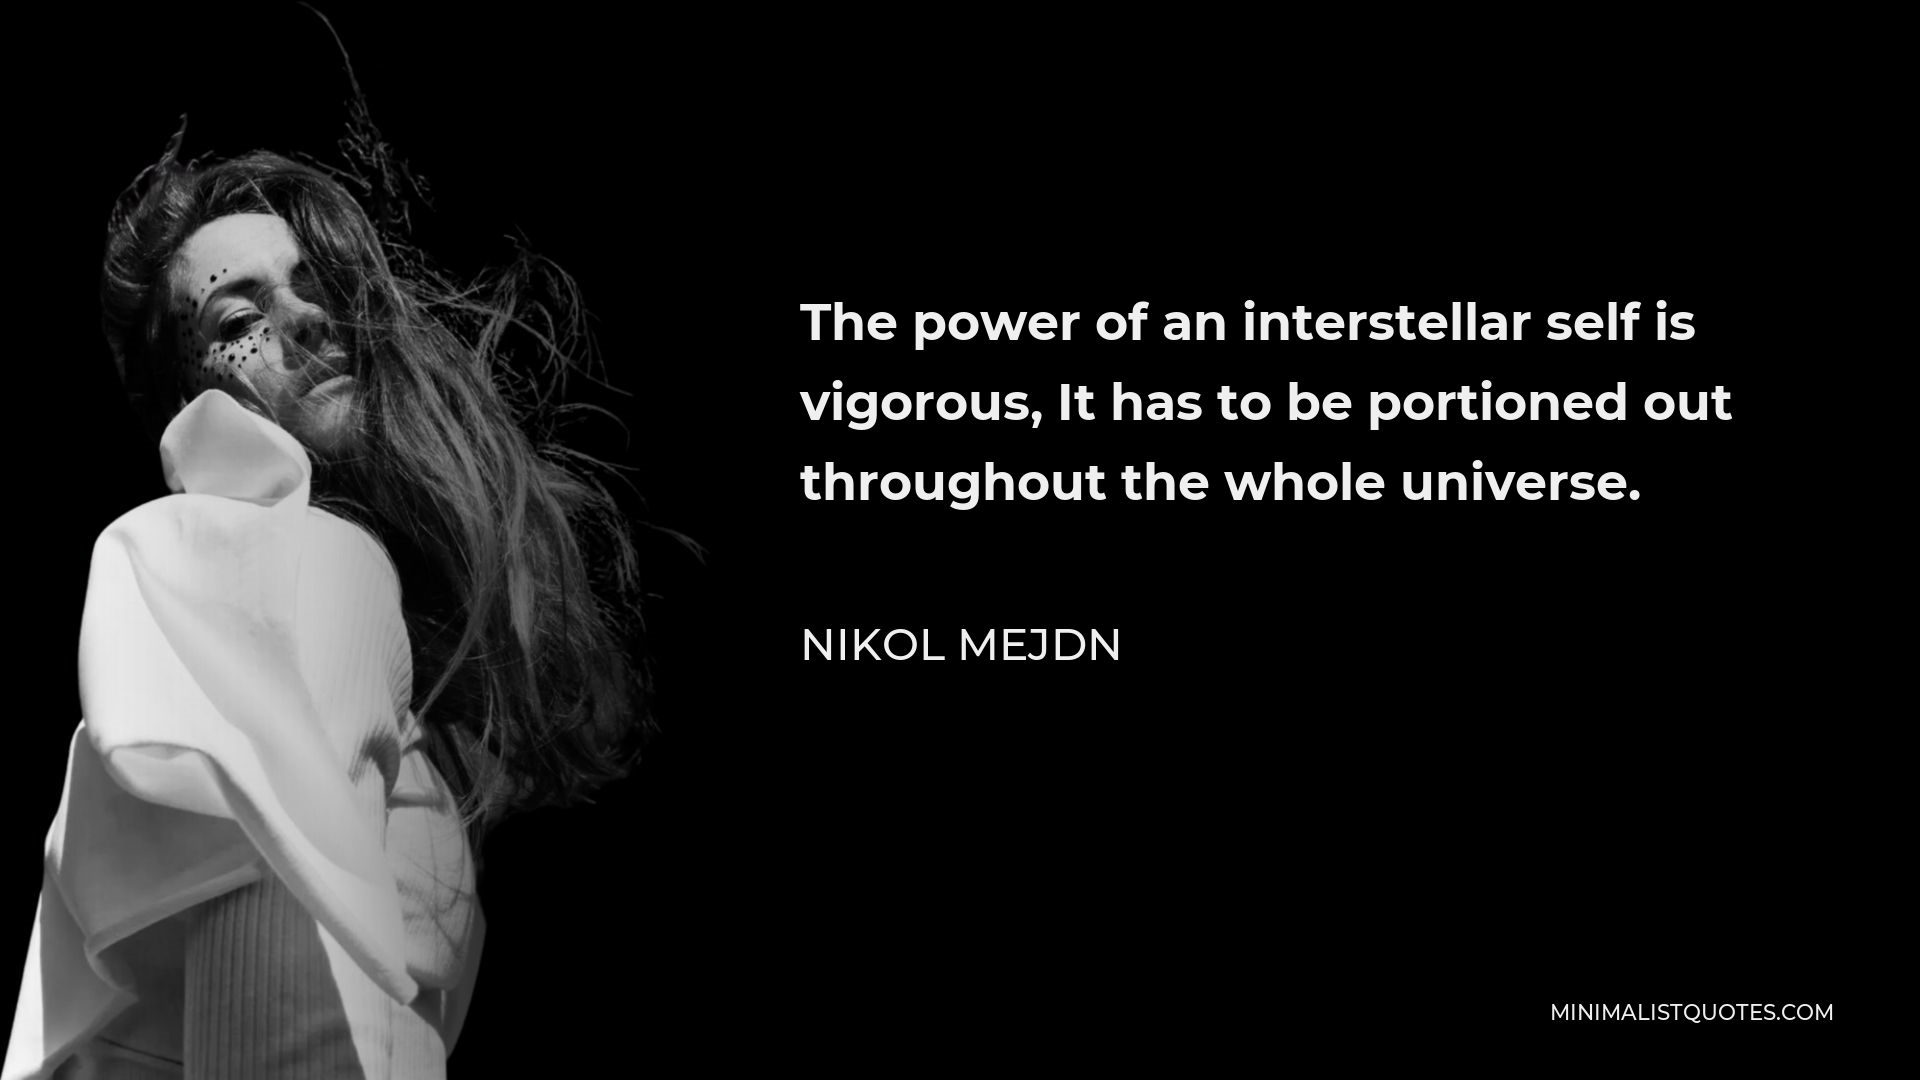 Nikol Mejdn Quote - The power of an interstellar self is vigorous, It has to be portioned out throughout the whole universe.